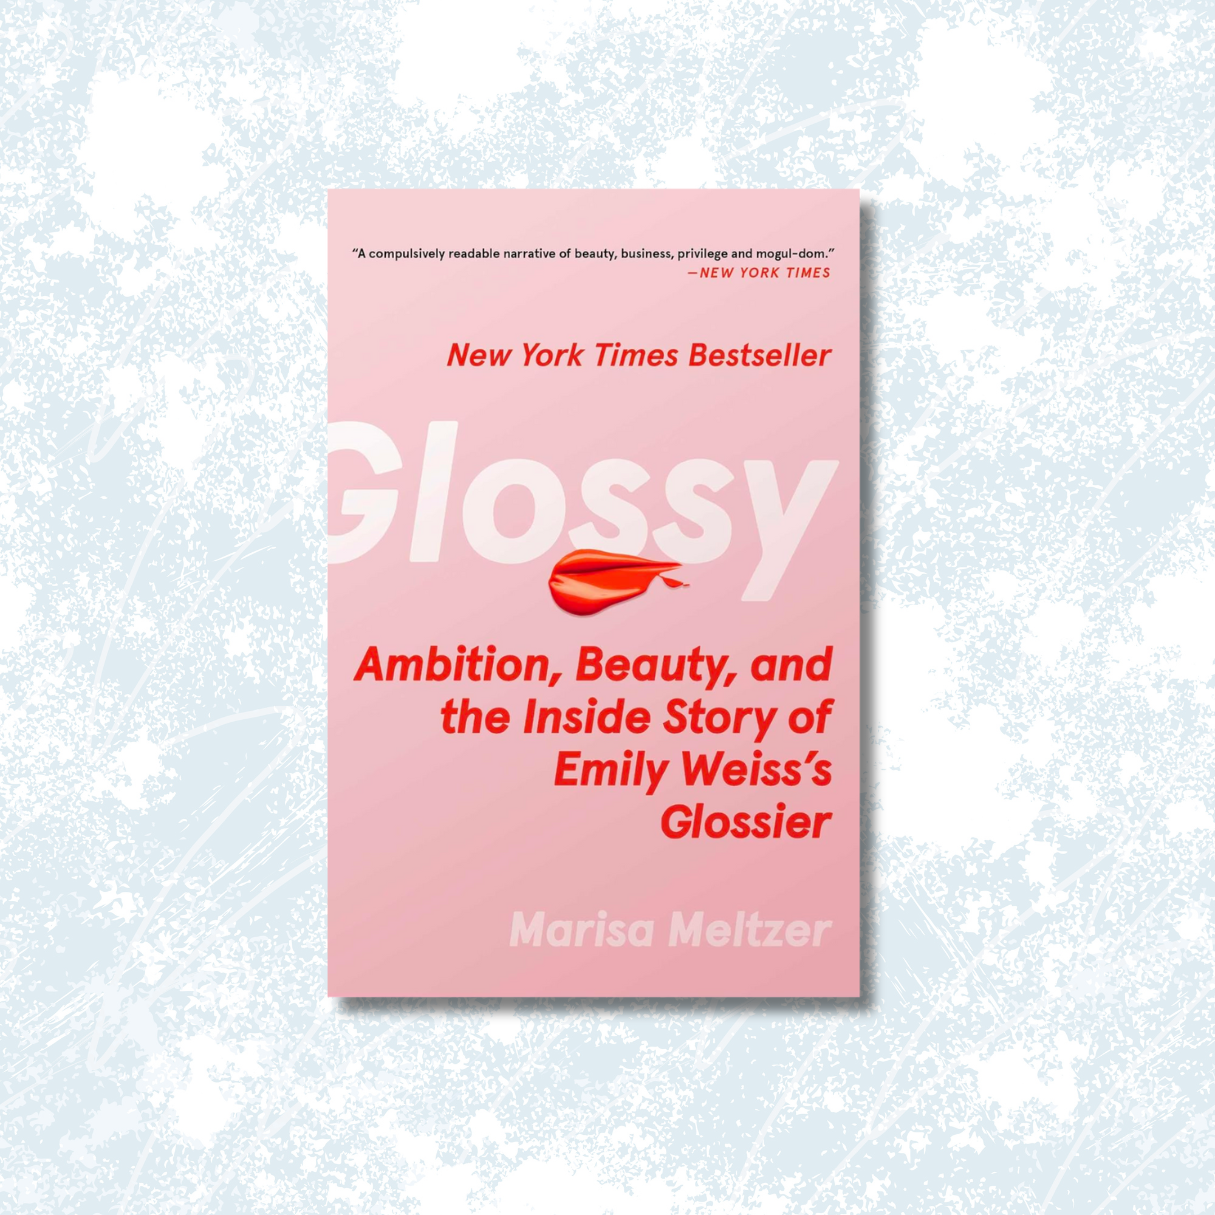 glossy emily weiss book